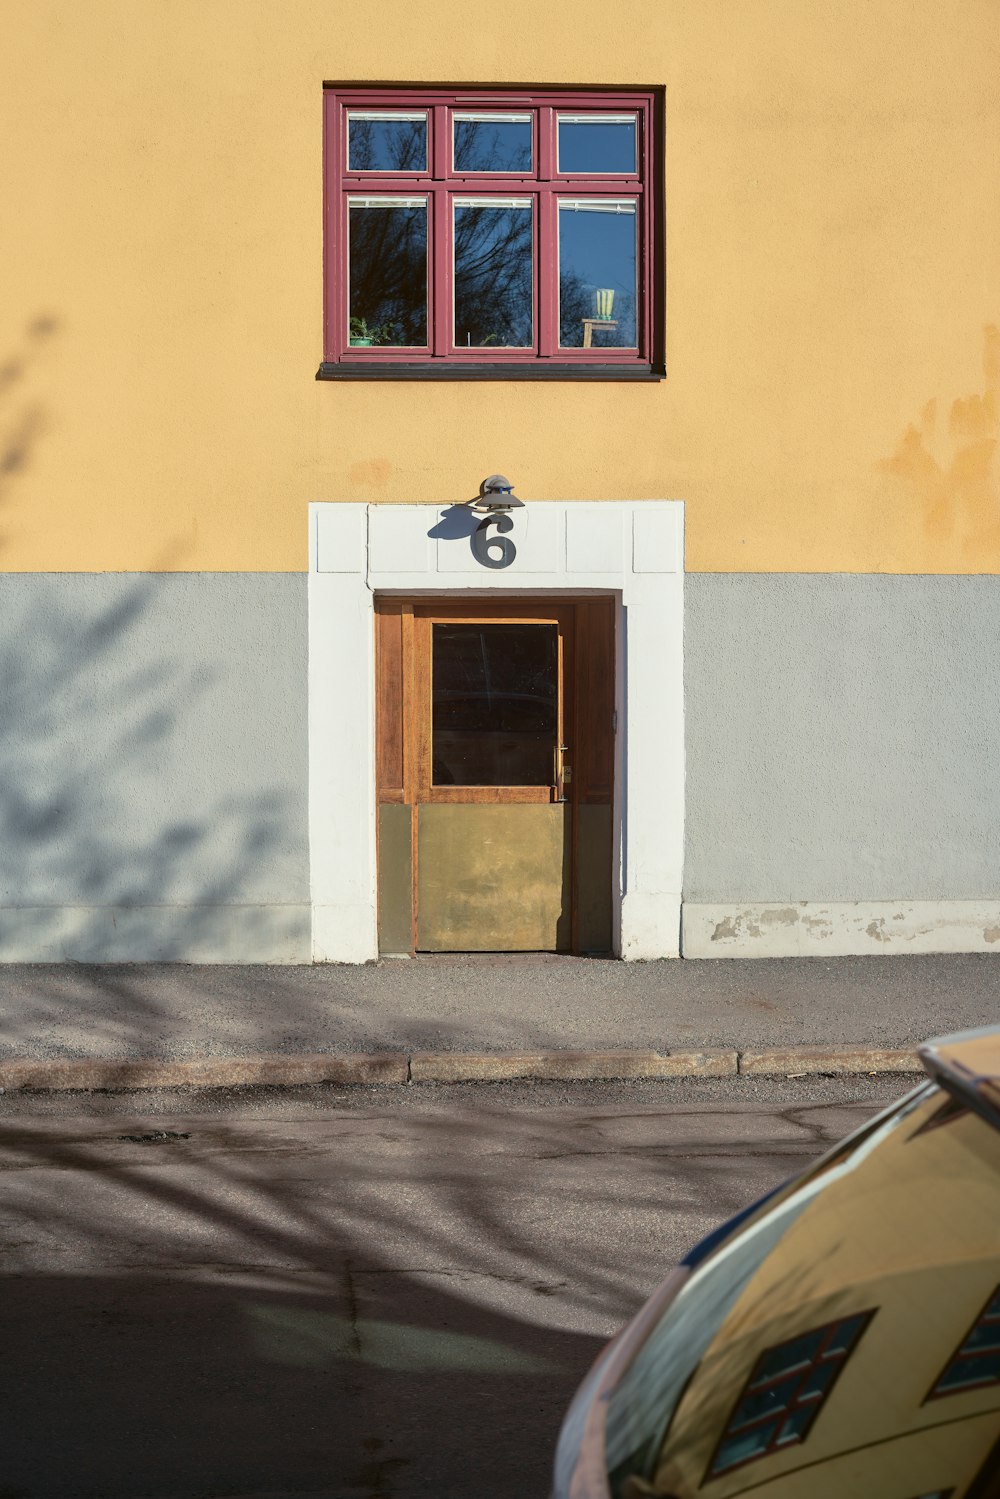 a car parked in front of a yellow building